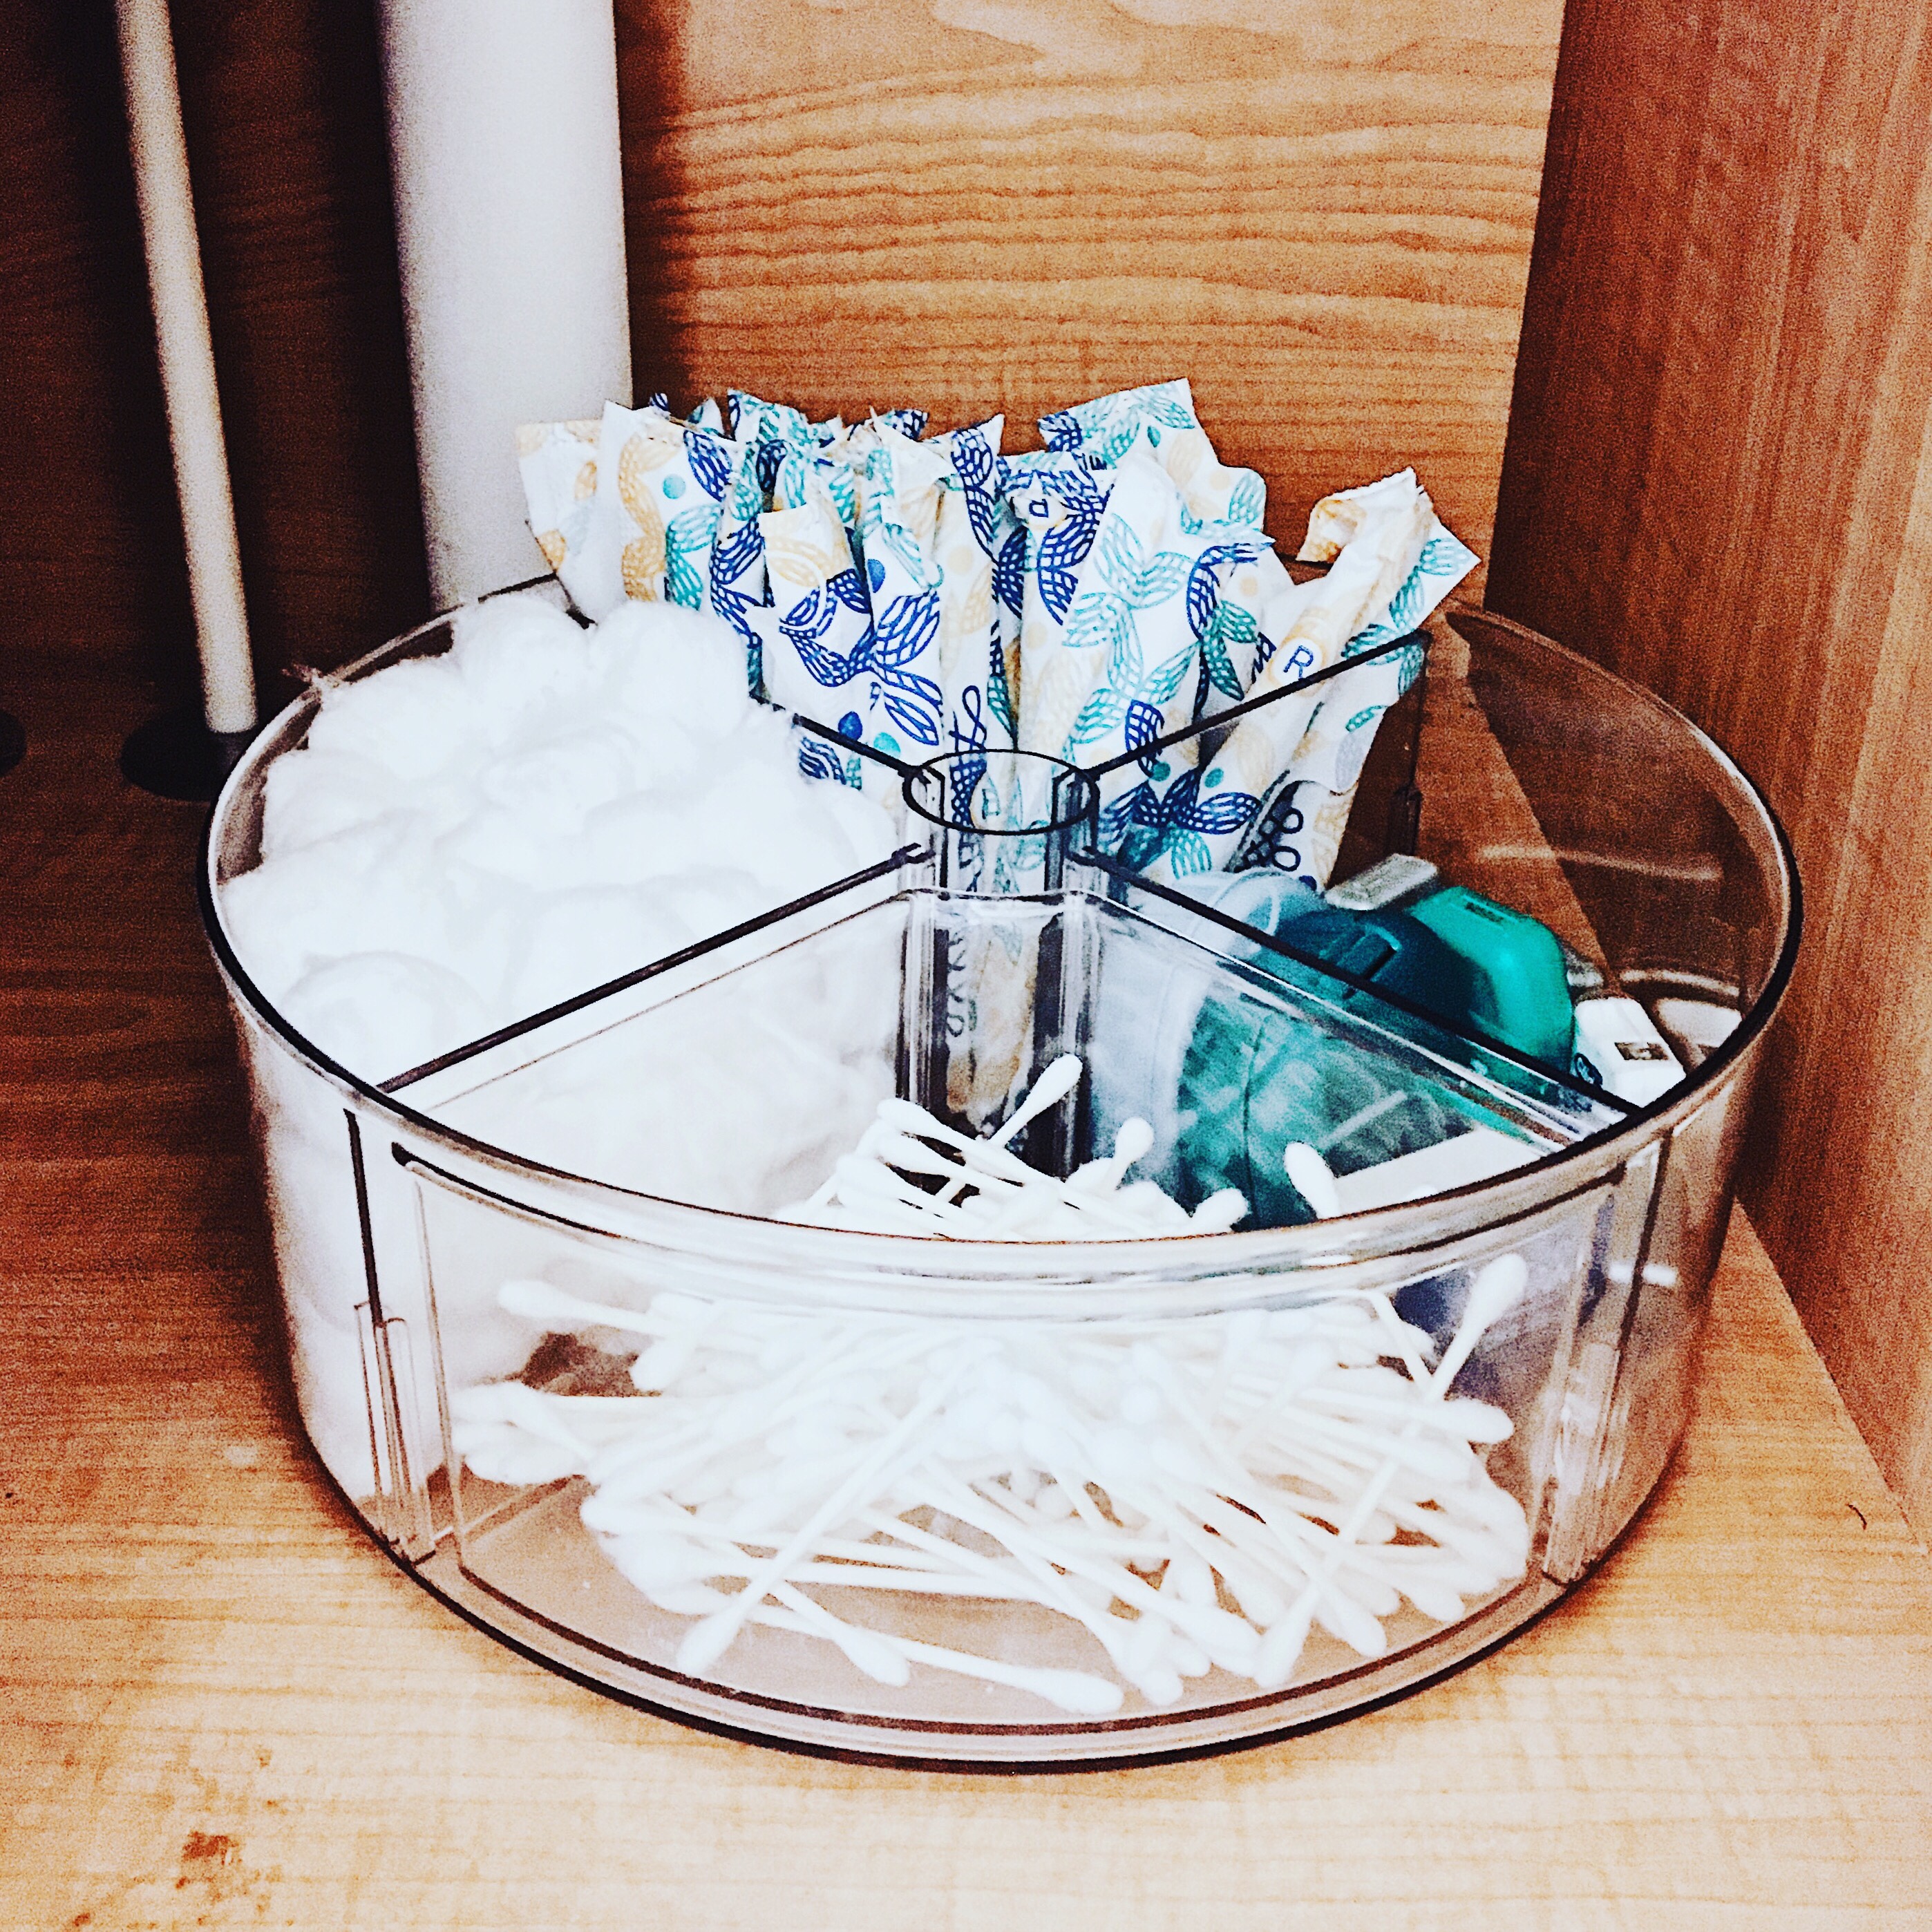 Bathroom organization to make your morning routine more peaceful and  productive!